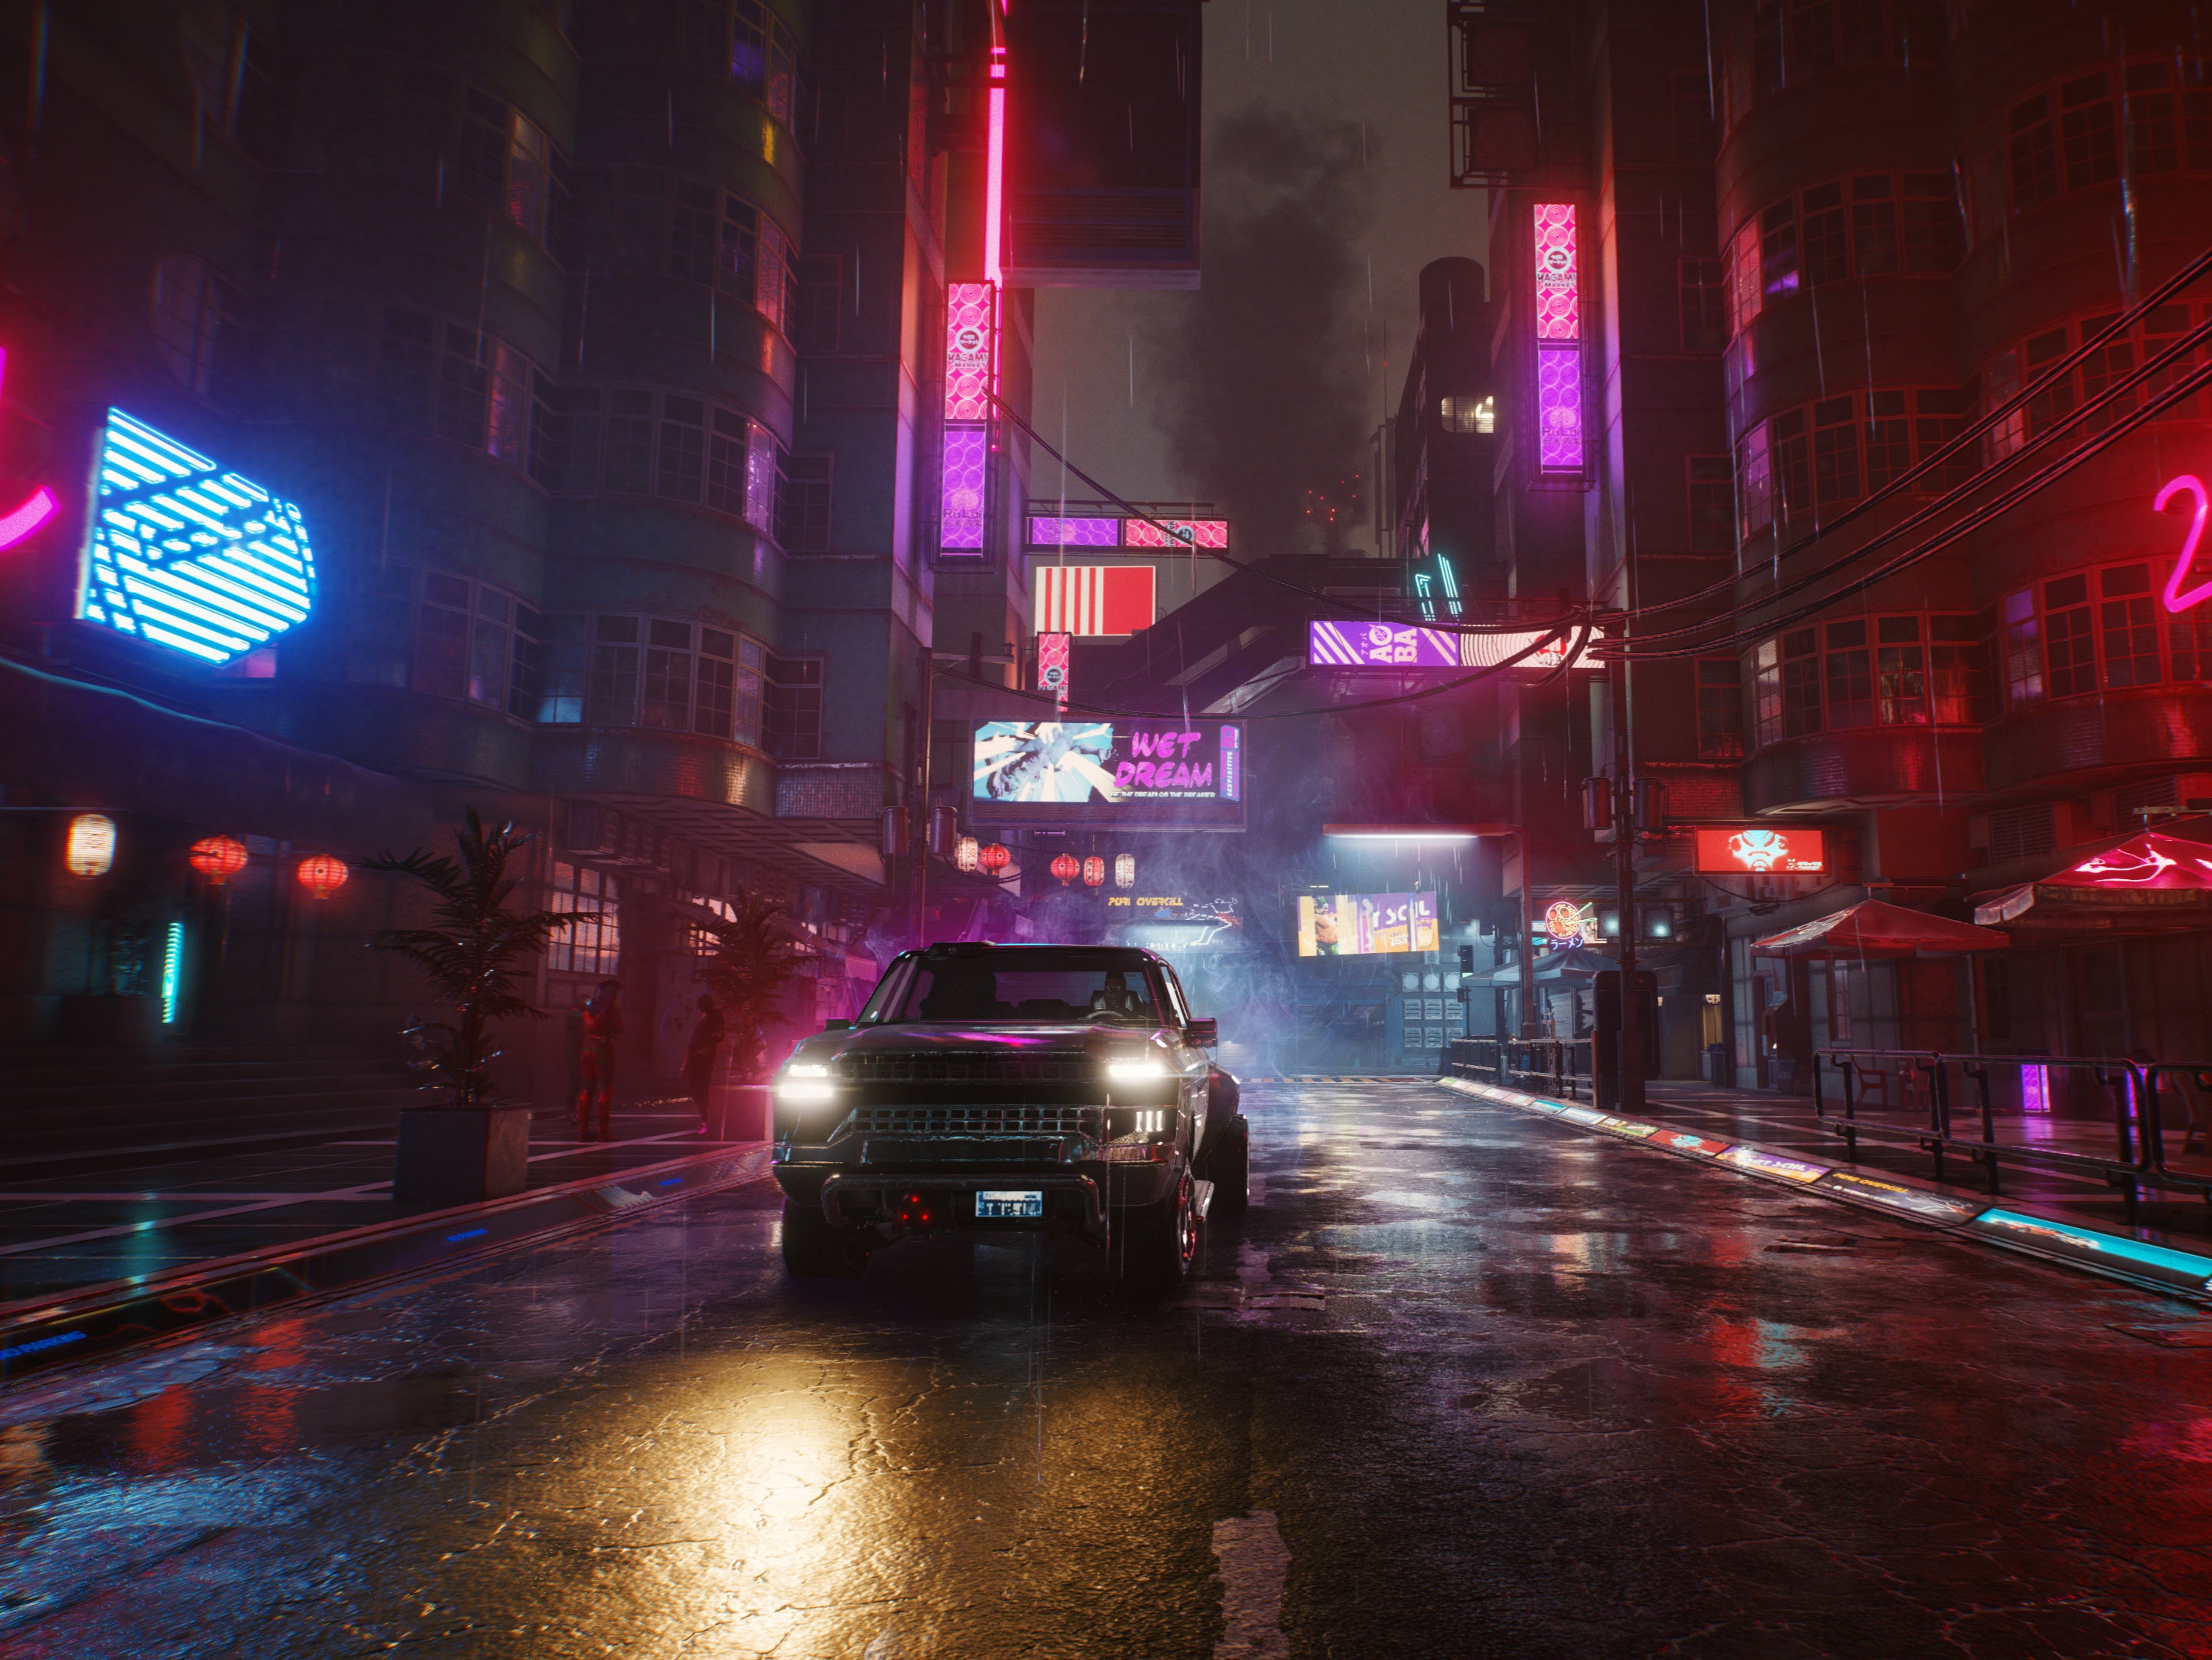 Check out these stunning Cyberpunk 2077 wallpapers